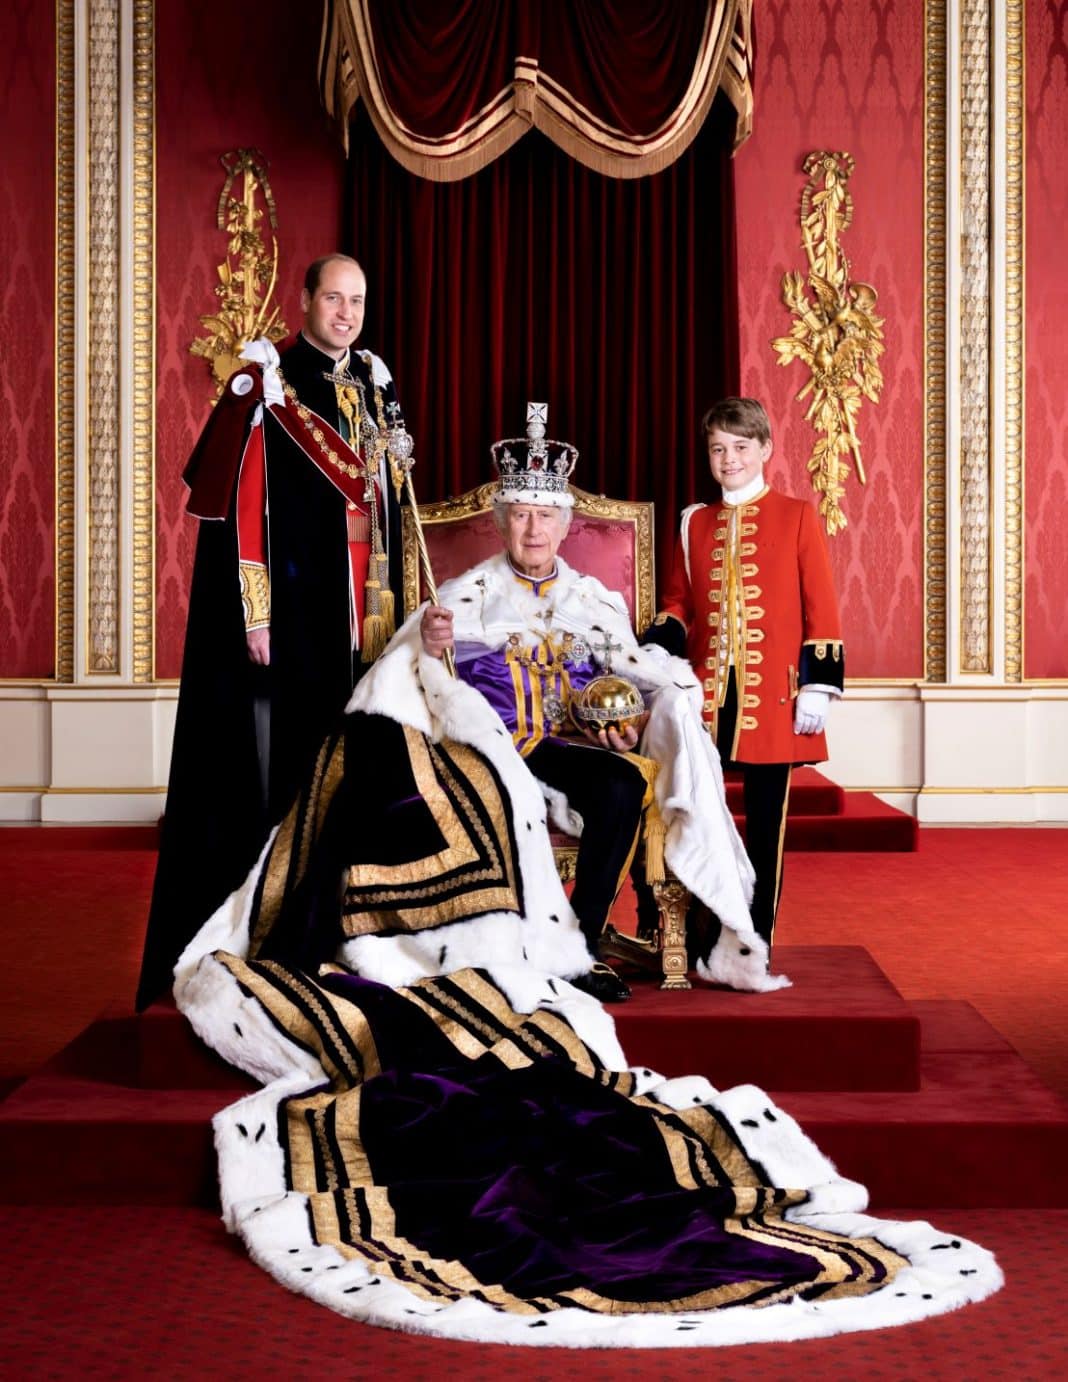 King Charles III, the Prince of Wales and Prince George pose for a photo, on the day of the coronation, Saturday, May 6, 2023, in the Throne Room at Buckingham Palace